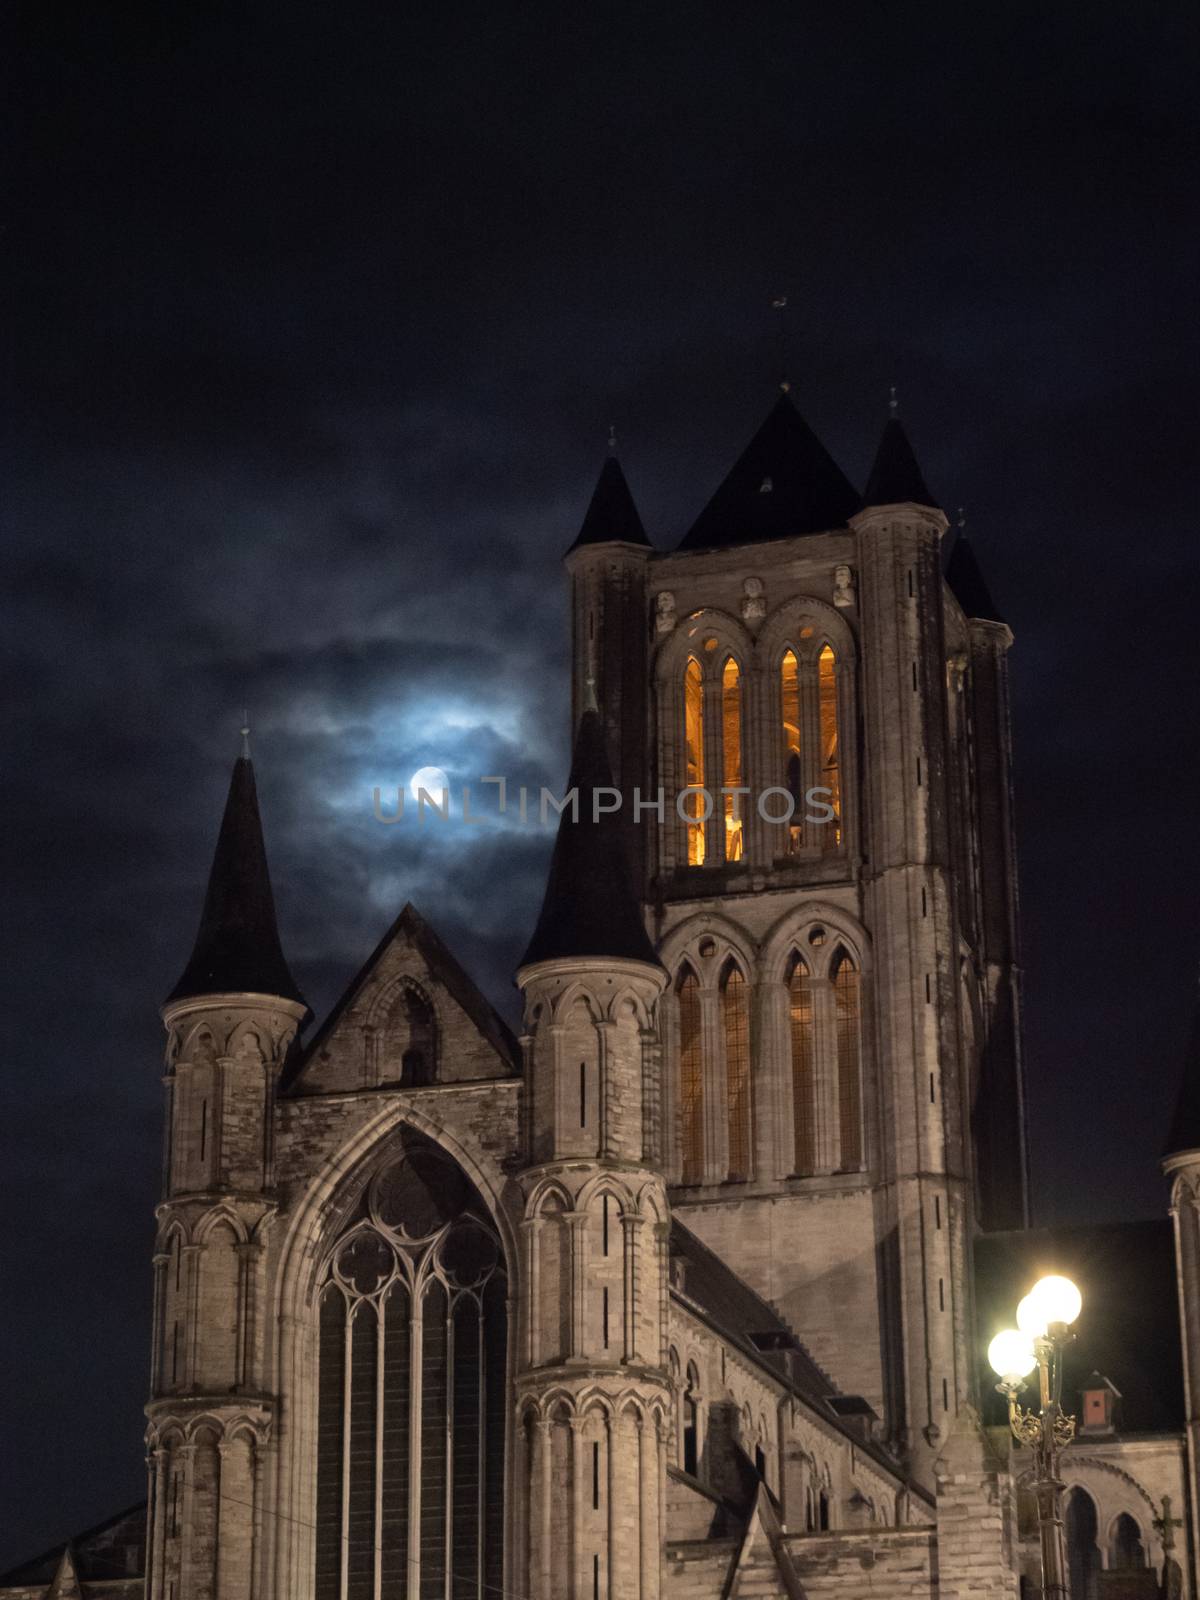 detail of the tower of Saint Nicholas Church, Ghent with the moon